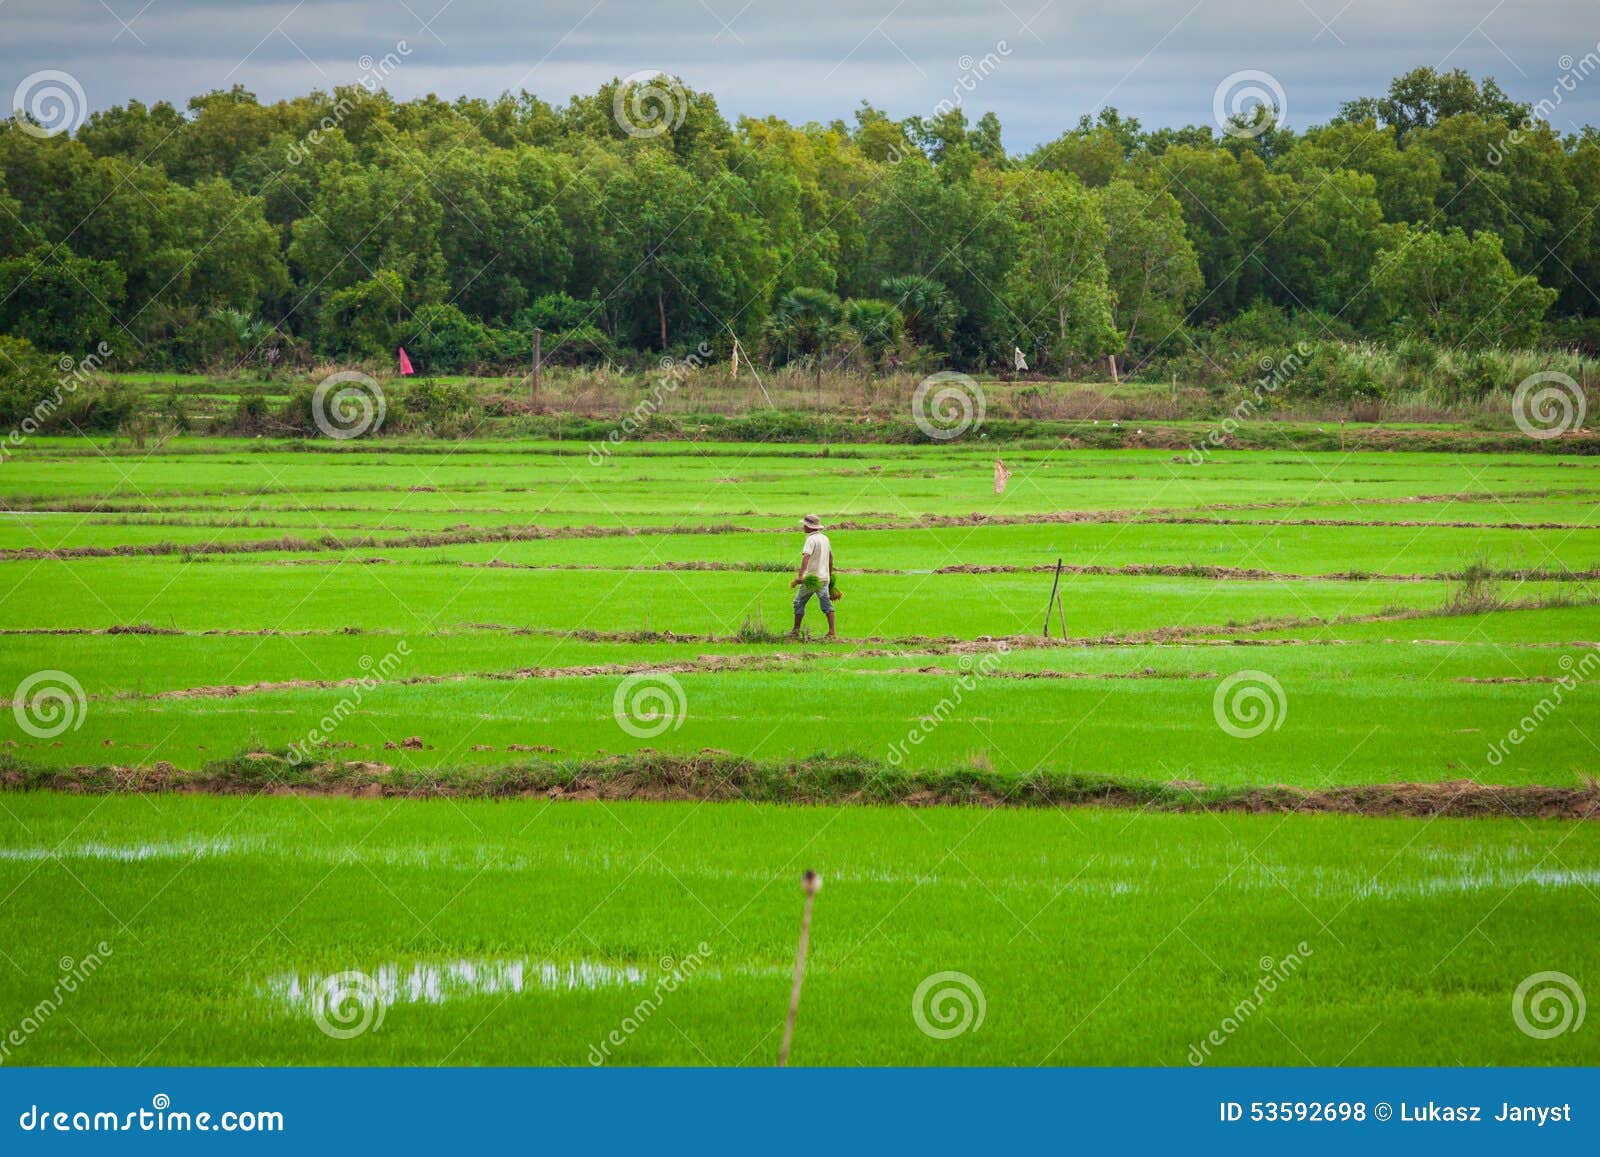 Cambodian Rice Fields Stock Photo Image Of Farmers Nature 53592698